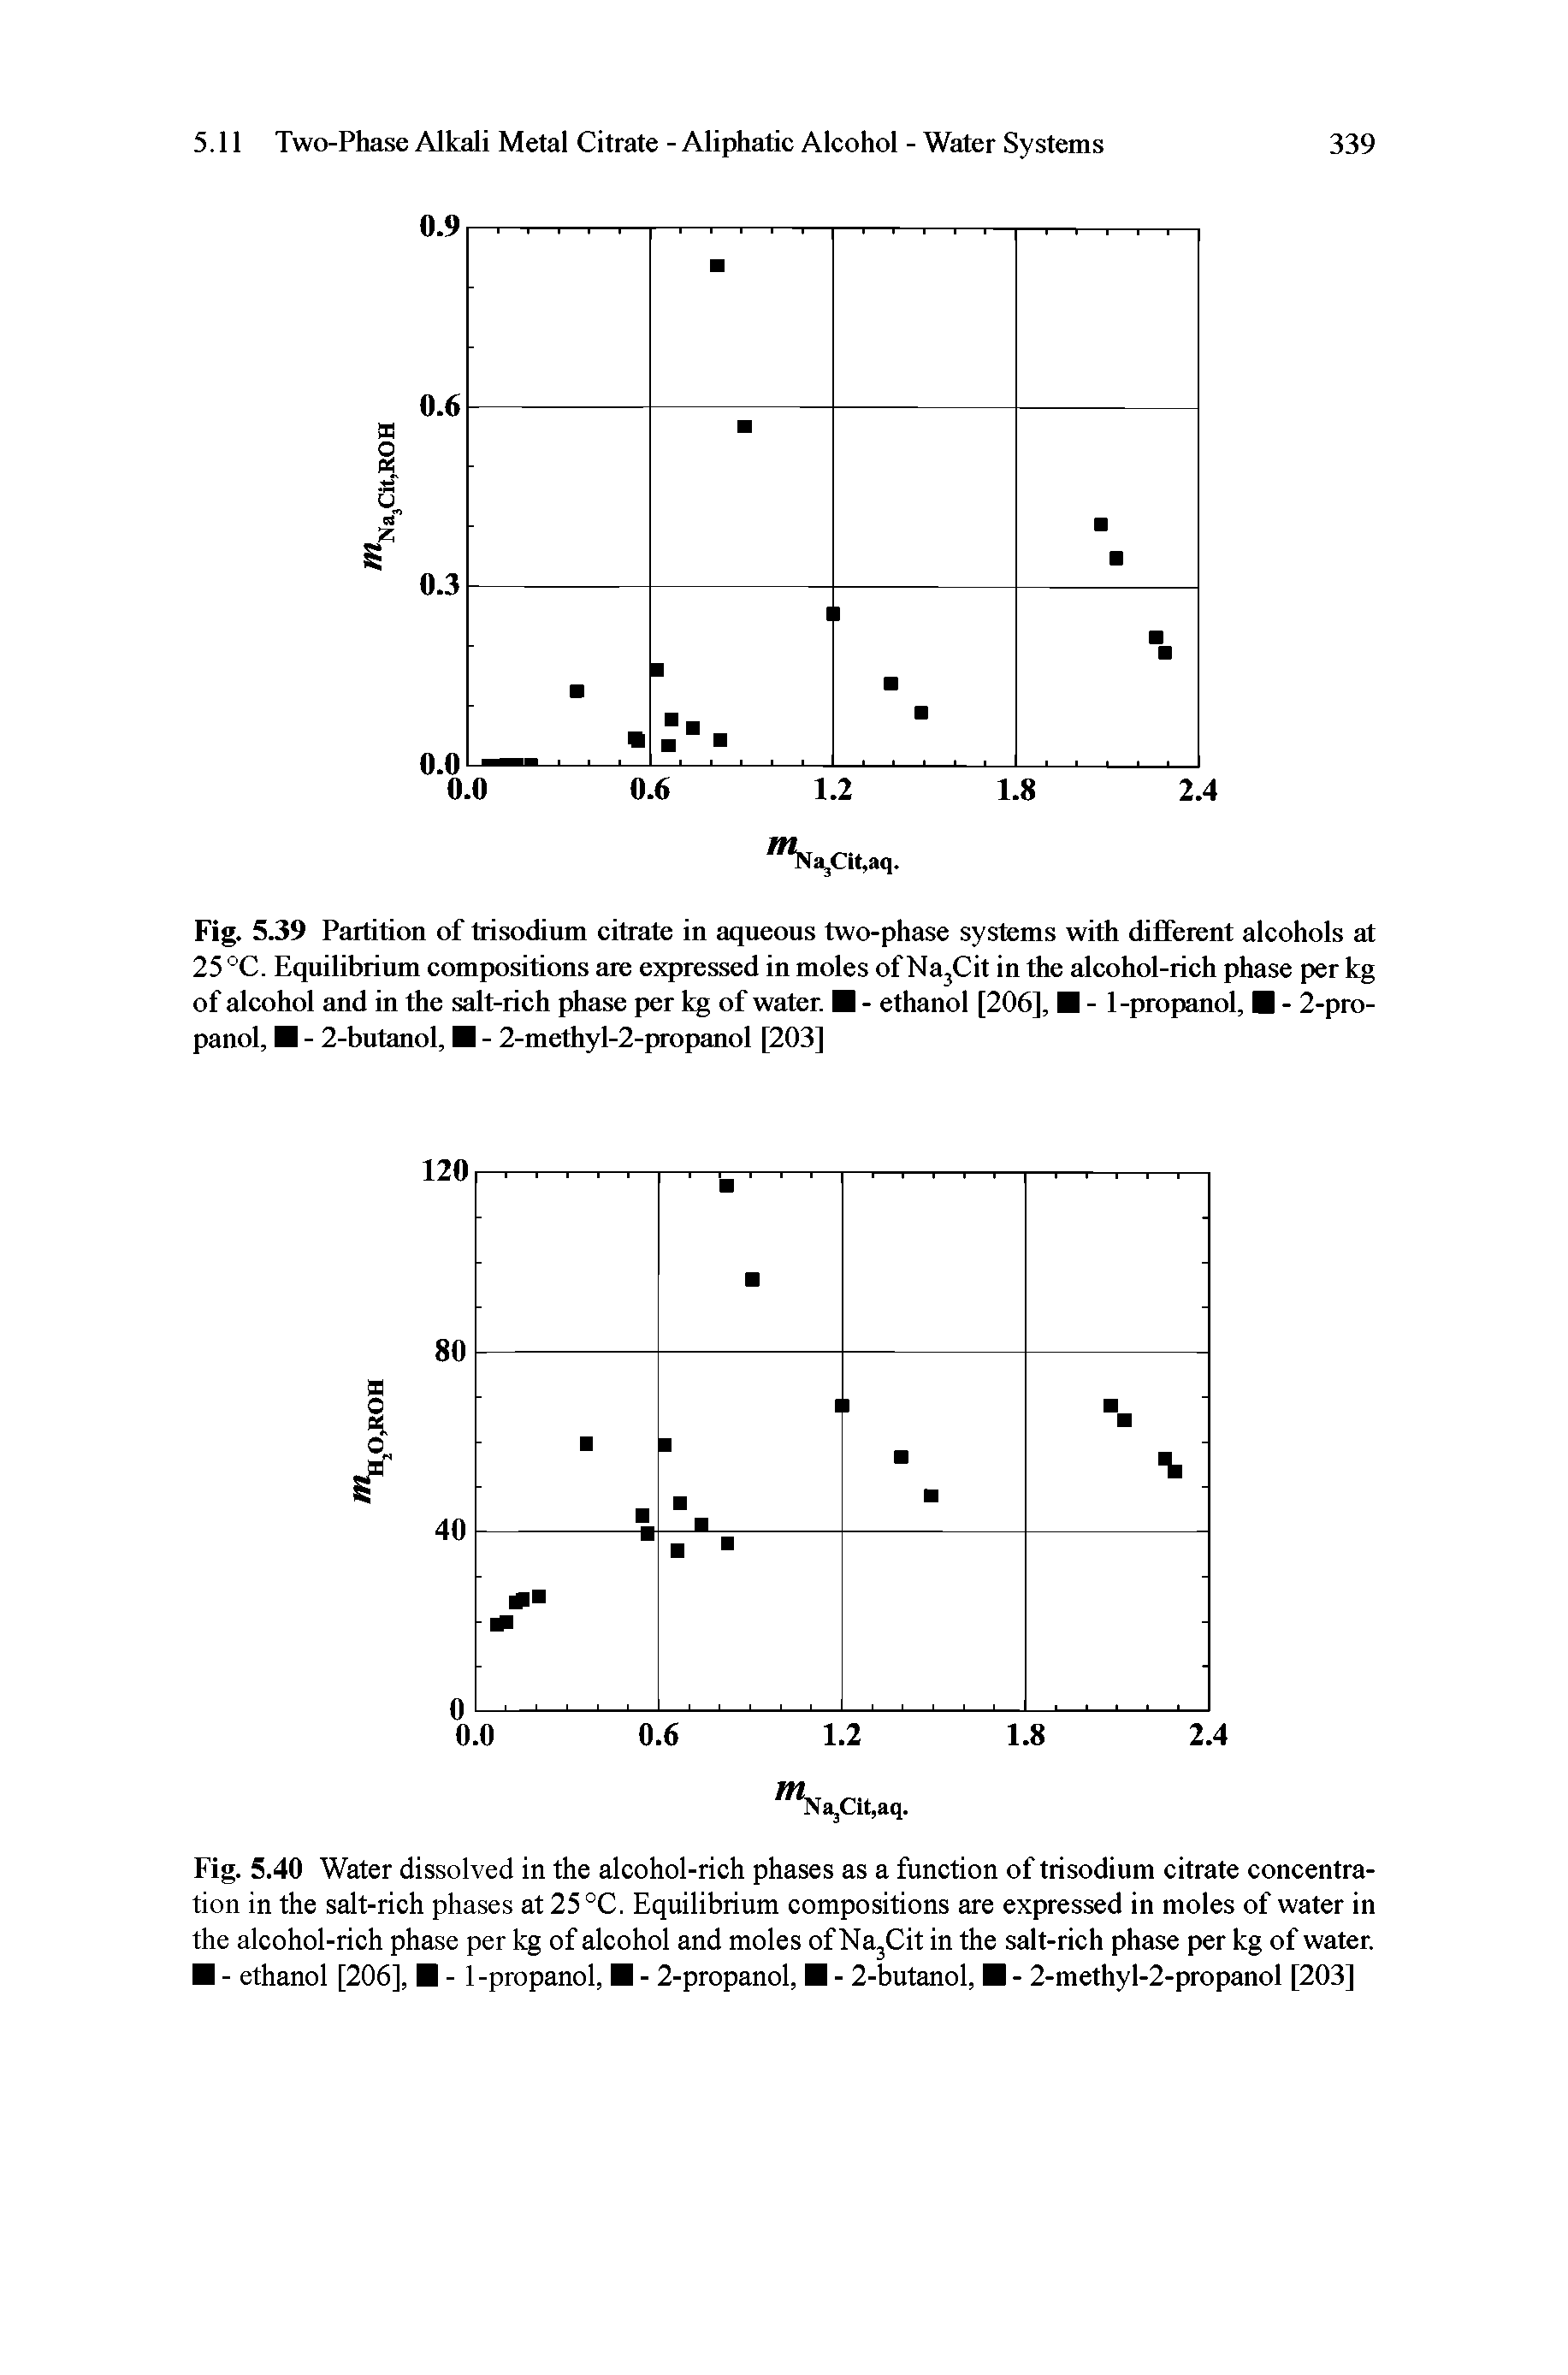 Fig. 5.39 Partition of trisodium citrate in aqueous two-phase systems with different alcohols at 25 °C. Equilibrium compositions are expressed in moles of NajCit in the alcohol-rich phase per kg of alcohol and in the salt-rich phase per kg of water. - ethanol [206], - 1-propanol, - 2-propanol, - 2-butanol, - 2-methyl-2-propanol [203]...